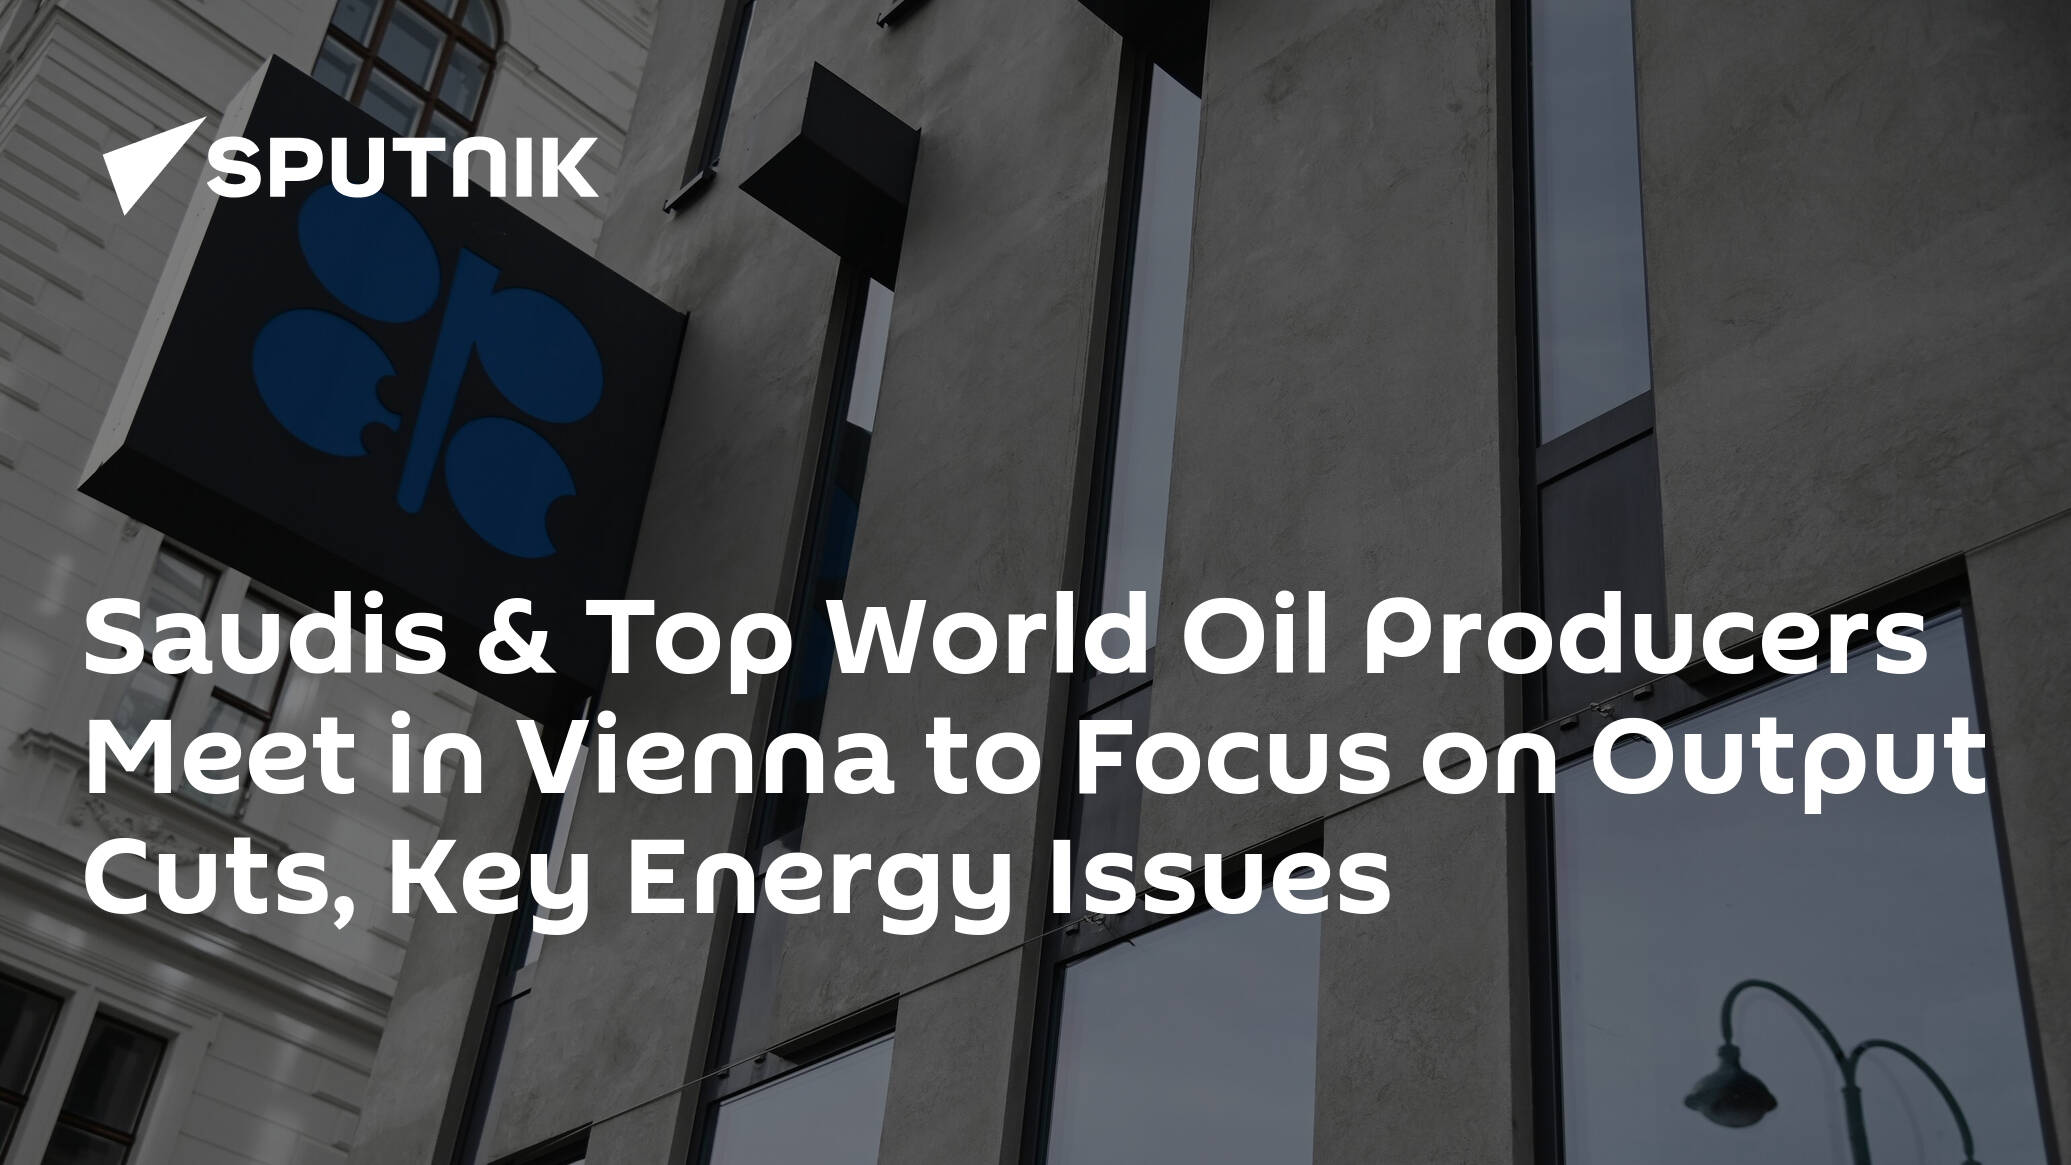 Saudis & Top World Oil Producers Meet in Vienna to Focus on Output Cuts, Key Energy Issues